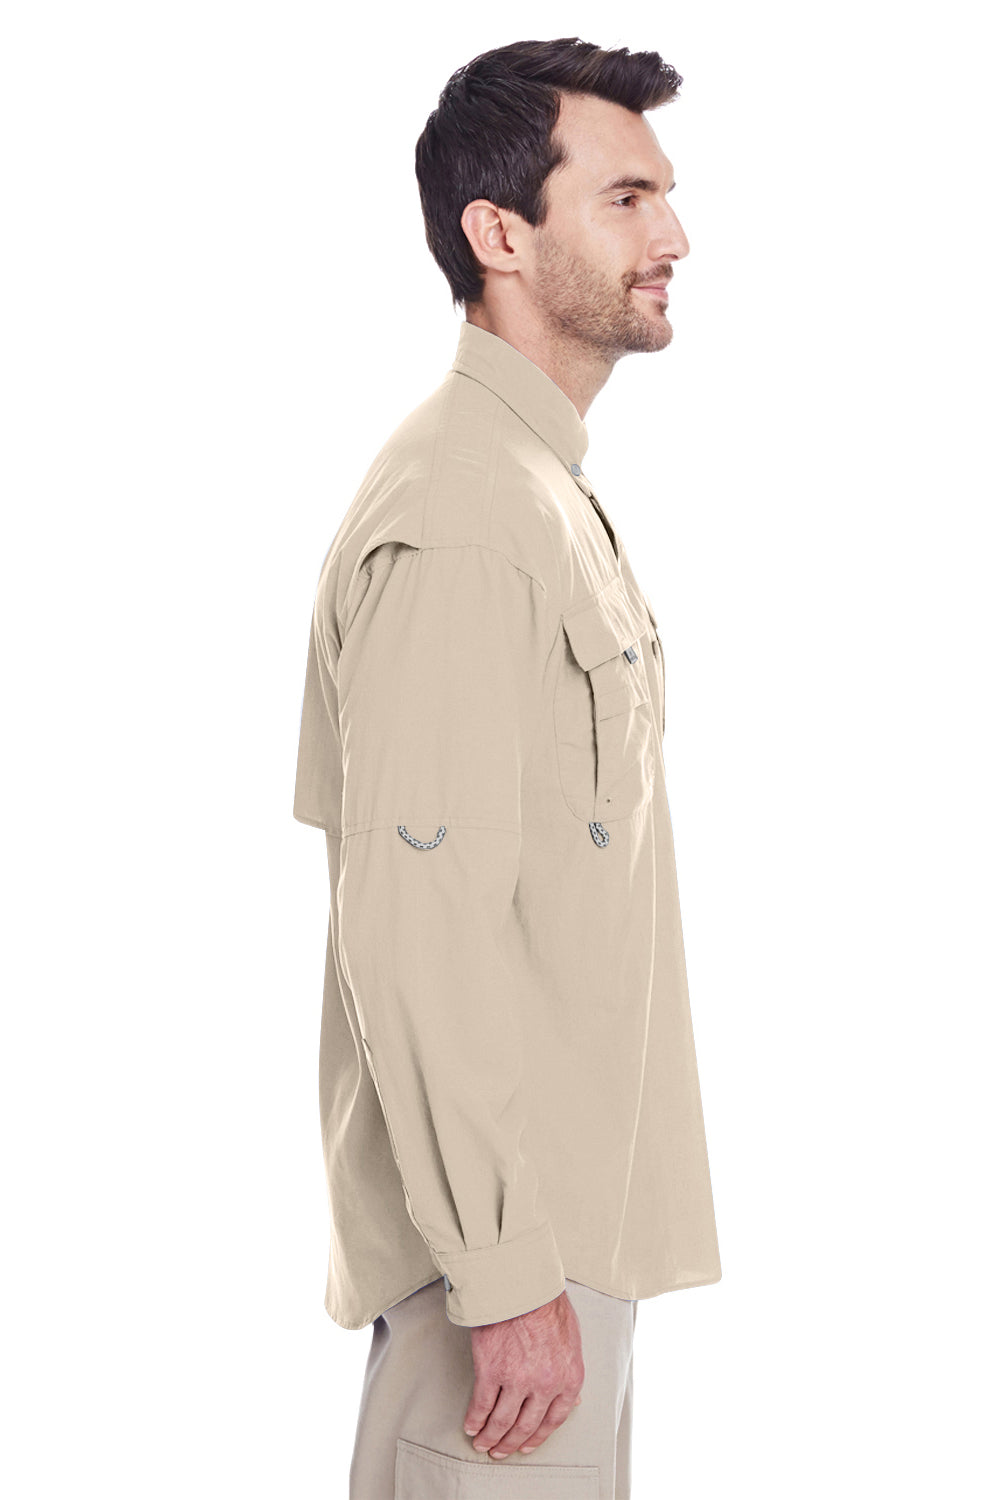 Columbia 7048 Mens Bahama II Moisture Wicking Long Sleeve Button Down Shirt w/ Double Pockets Fossil Brown Side